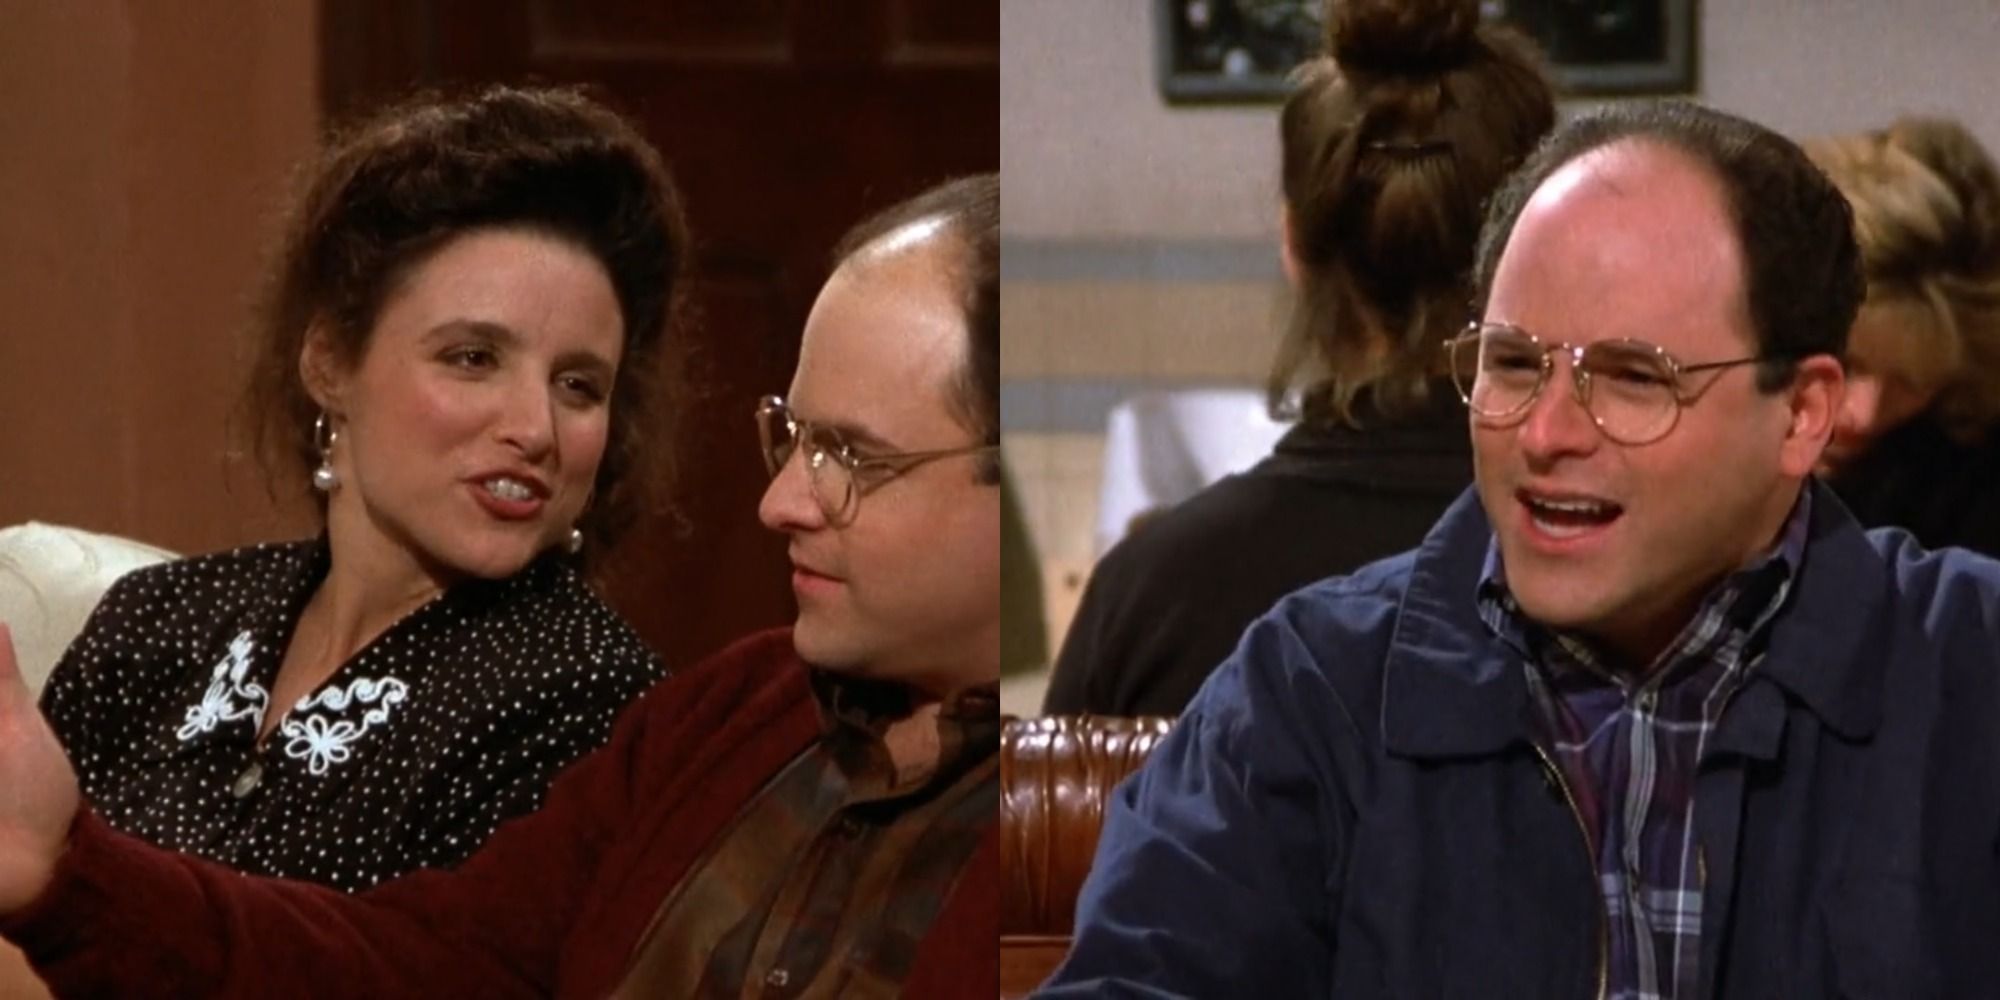 Seinfeld George Costanza says the worst things